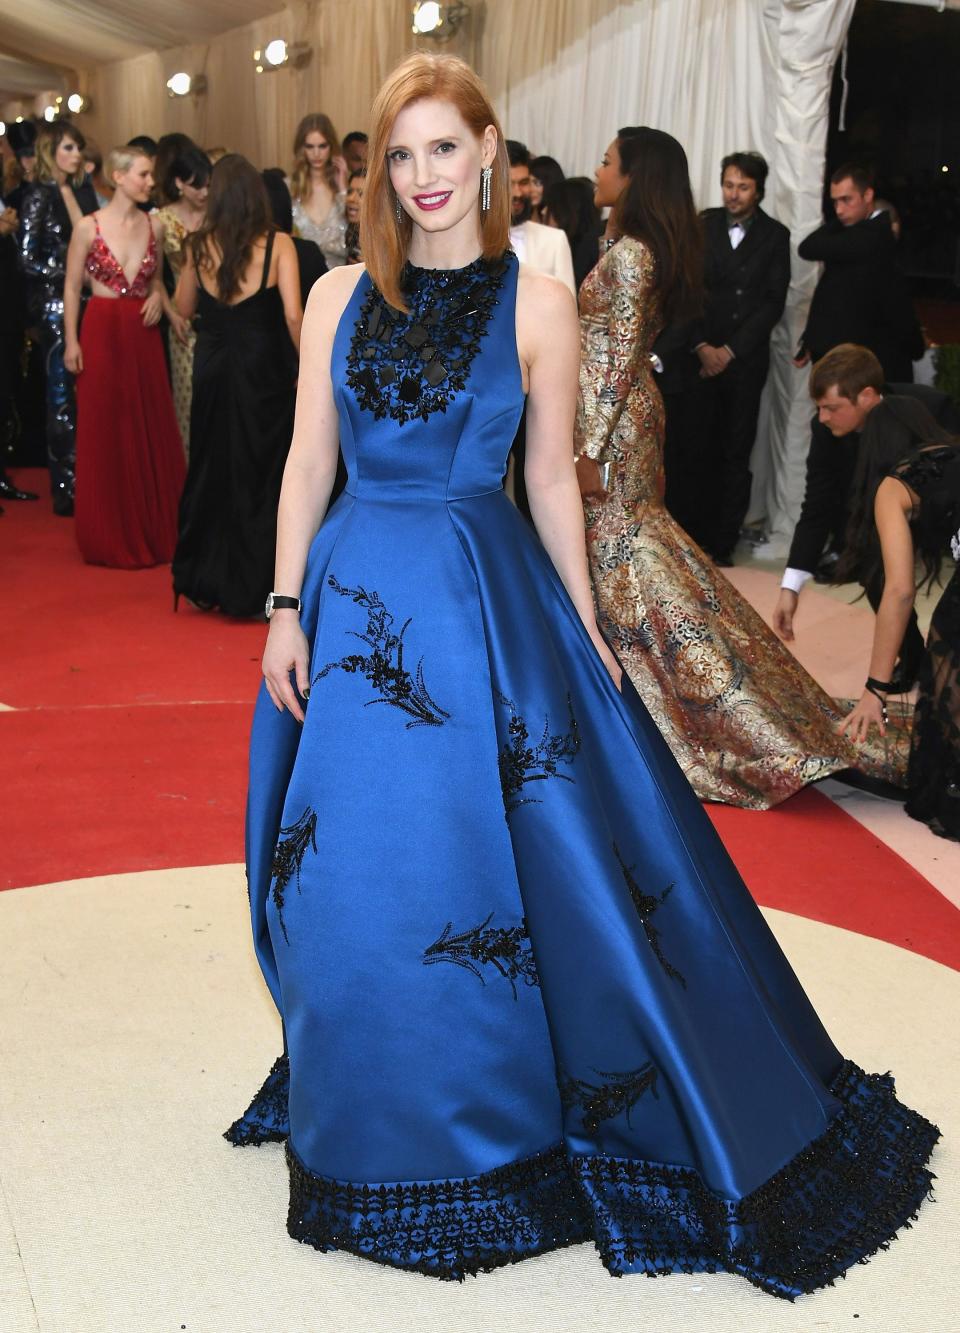 <h1 class="title">Jessica Chastain in a Prada dress and Piaget jewelry</h1><cite class="credit">Photo: Getty Images</cite>